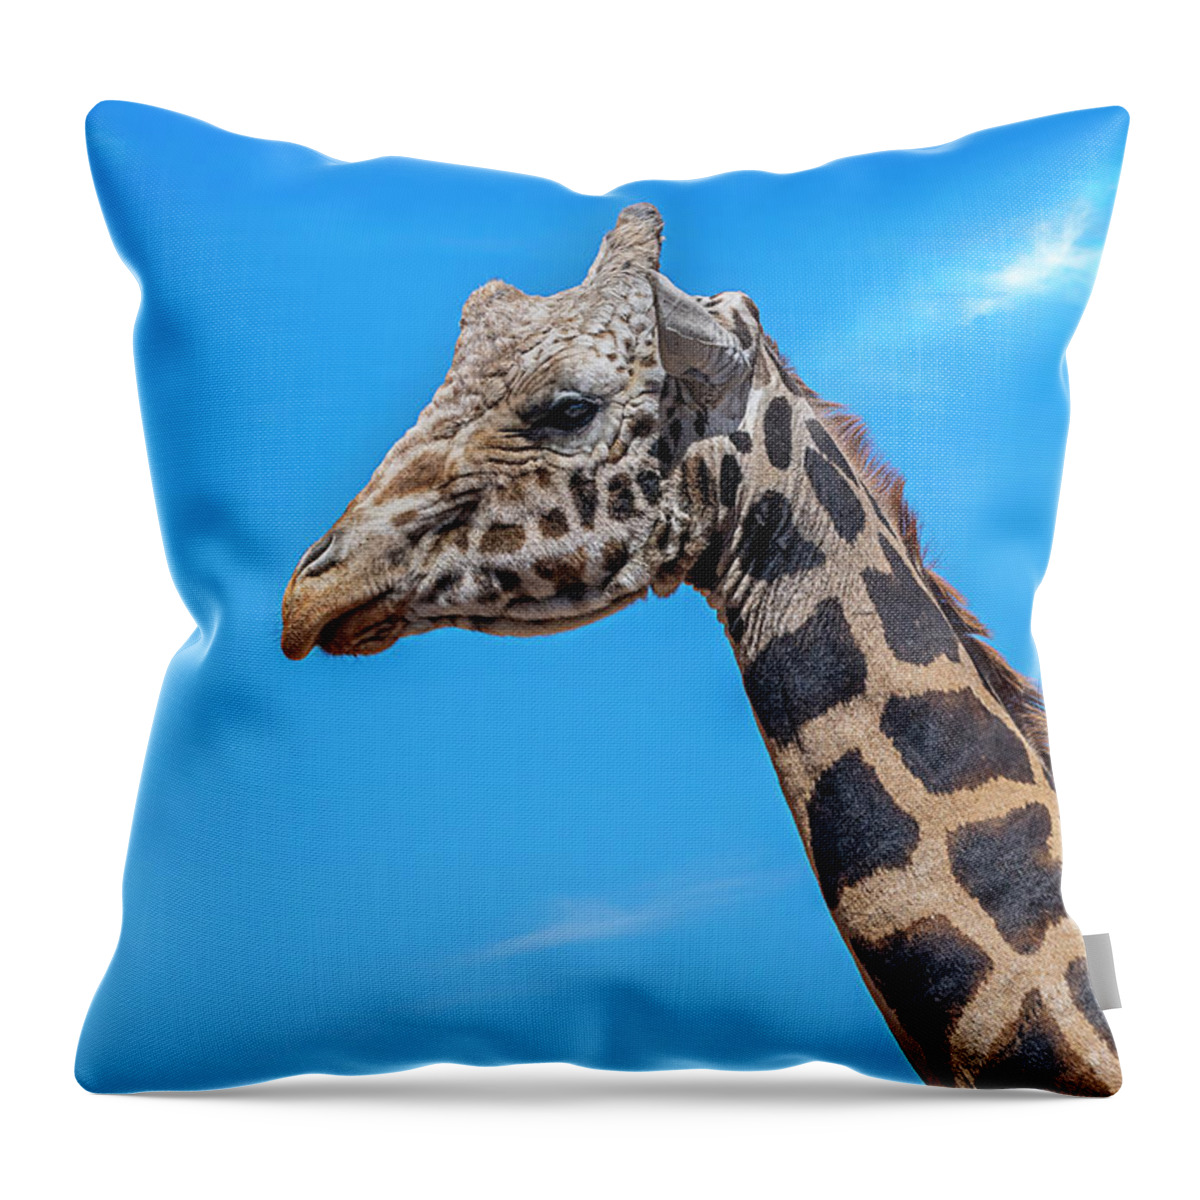  Throw Pillow featuring the photograph Old Giraffe by Al Judge